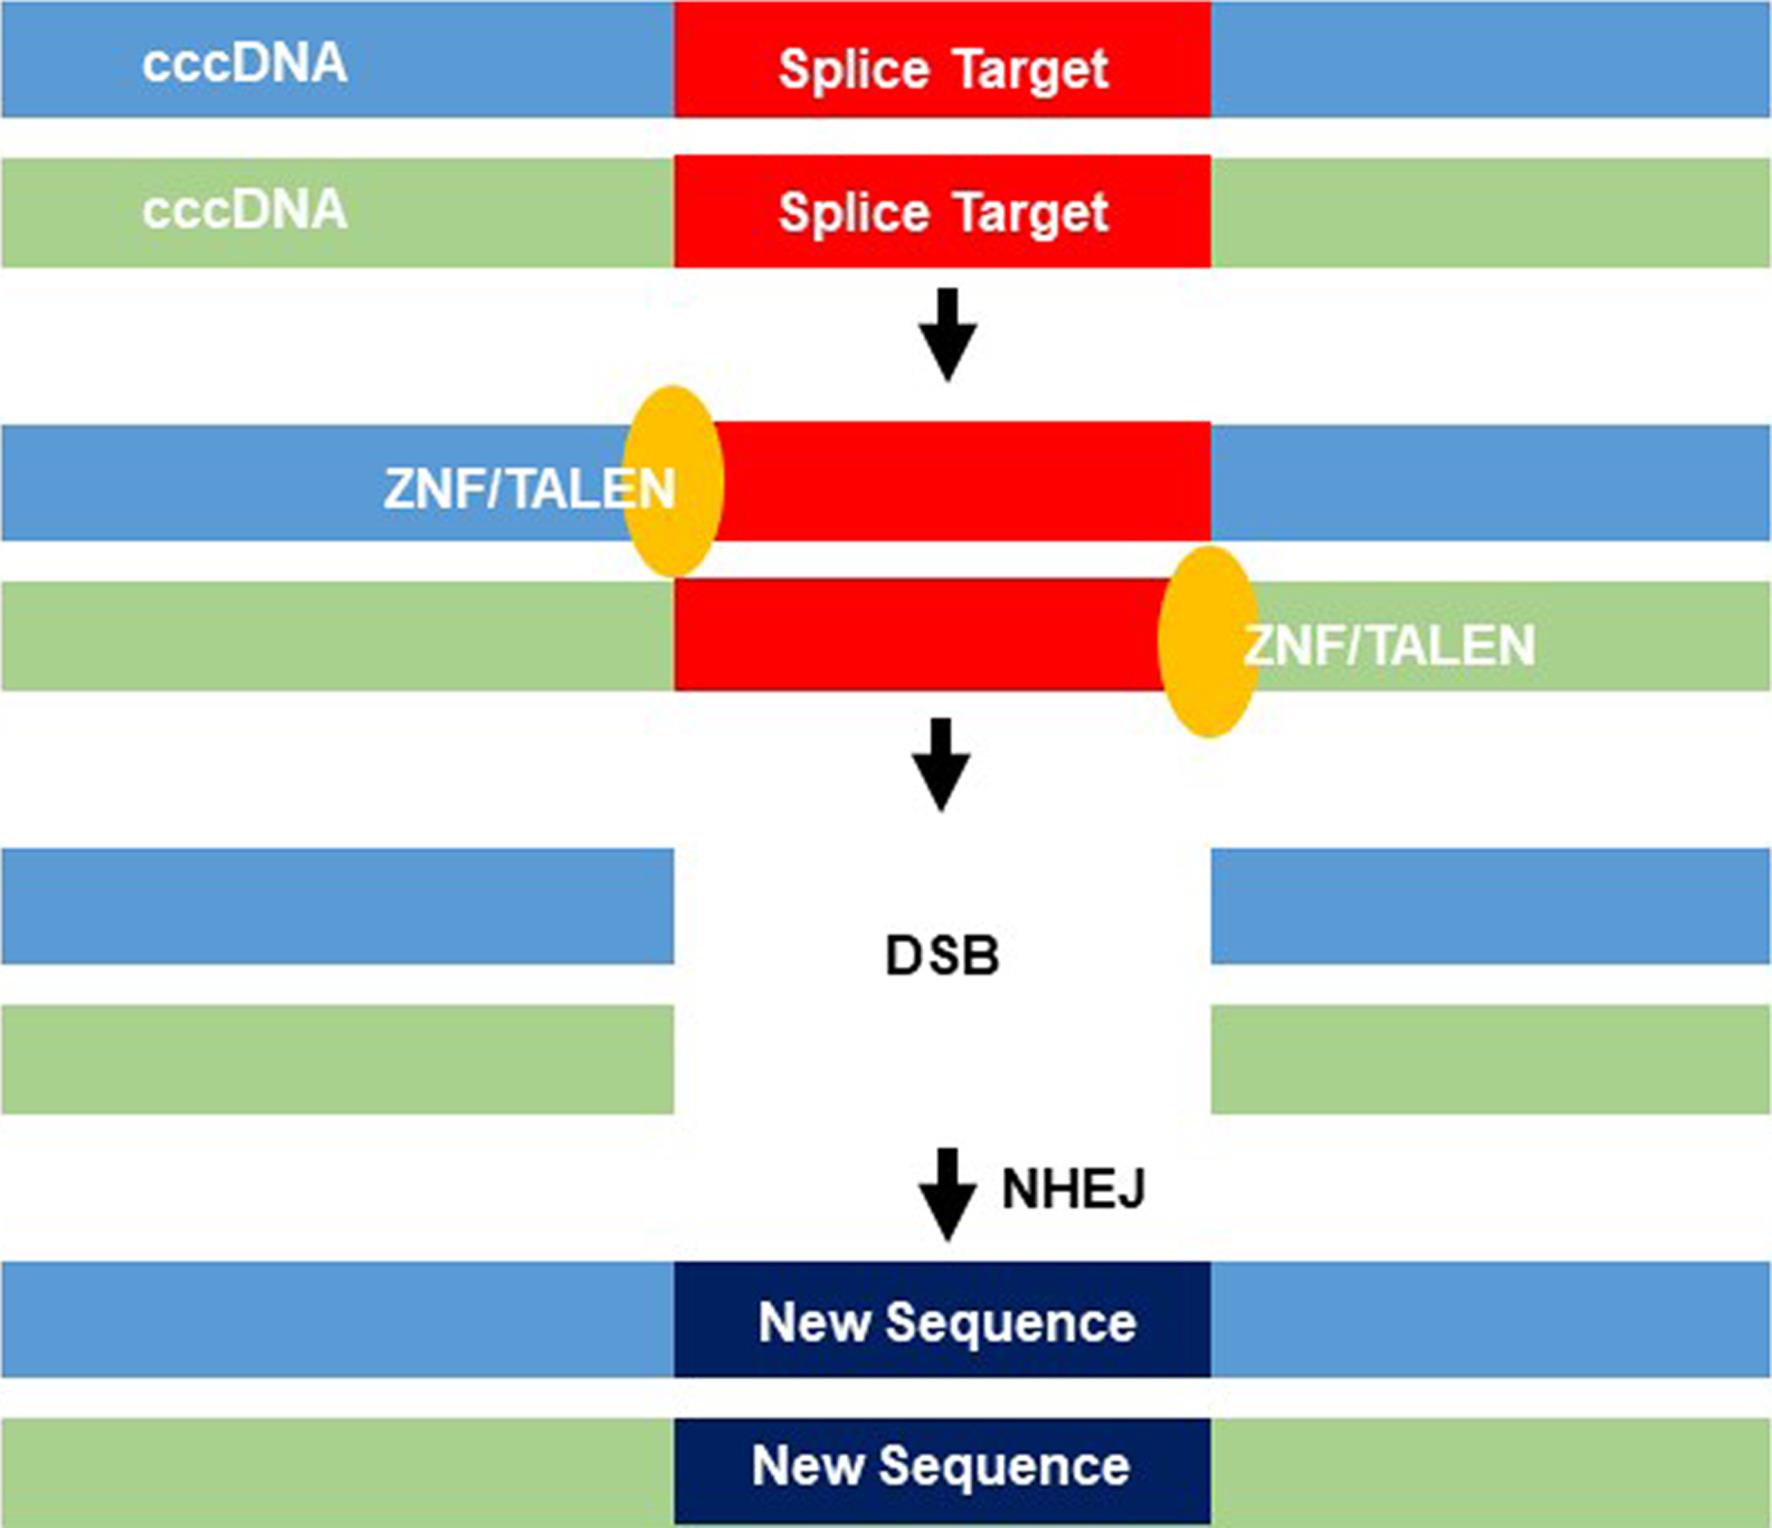 Gene editing mechanisms of zinc finger nucleases and transcription activator-like effector nucleases.